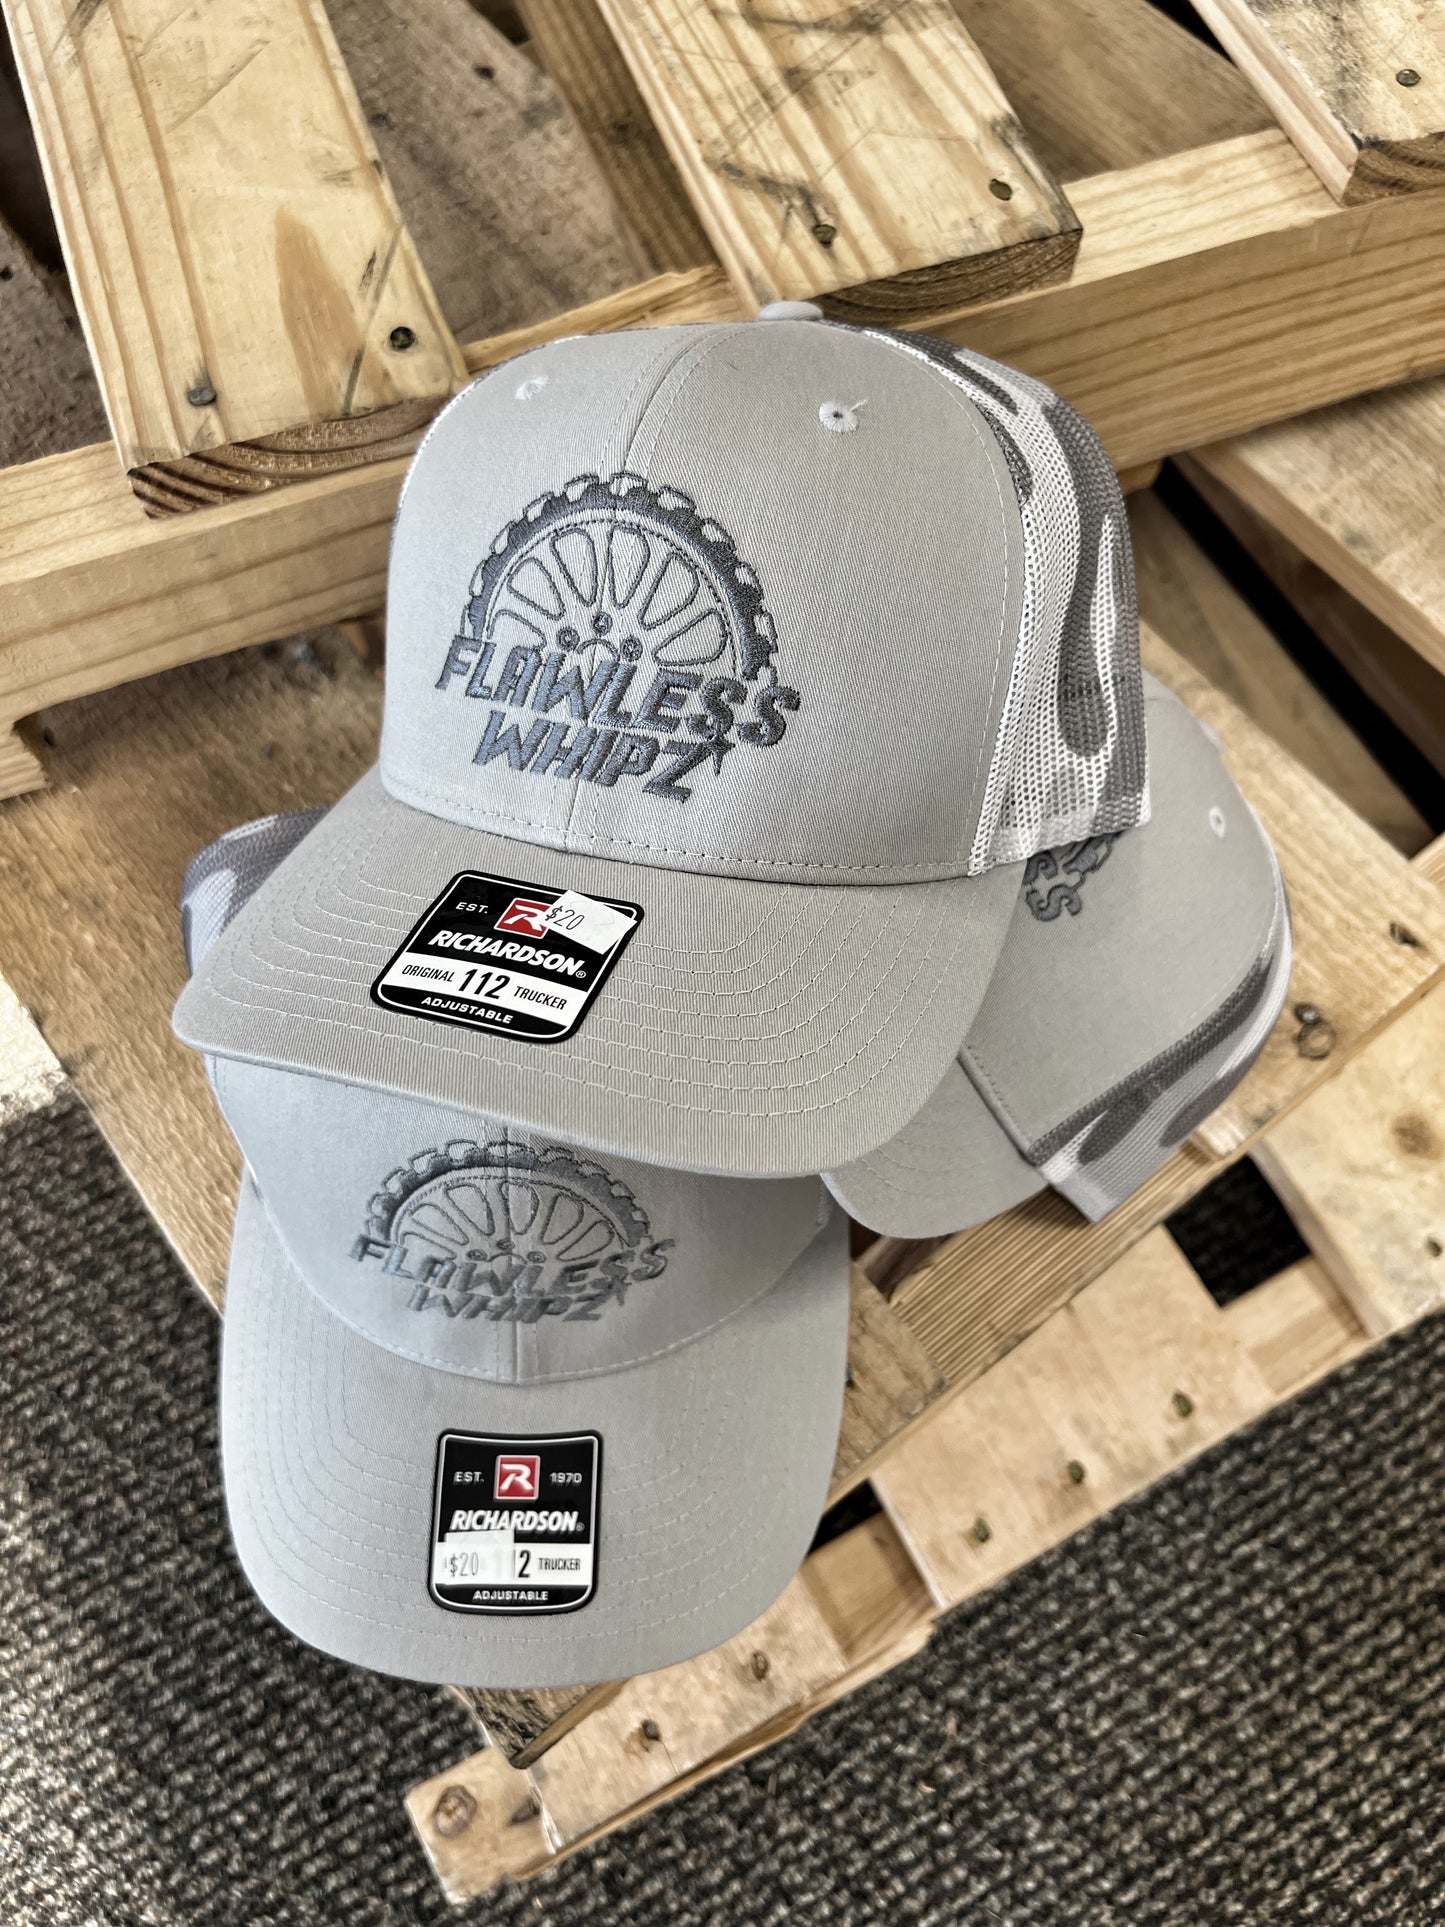 THE Flawless Whipz Trucker Hats